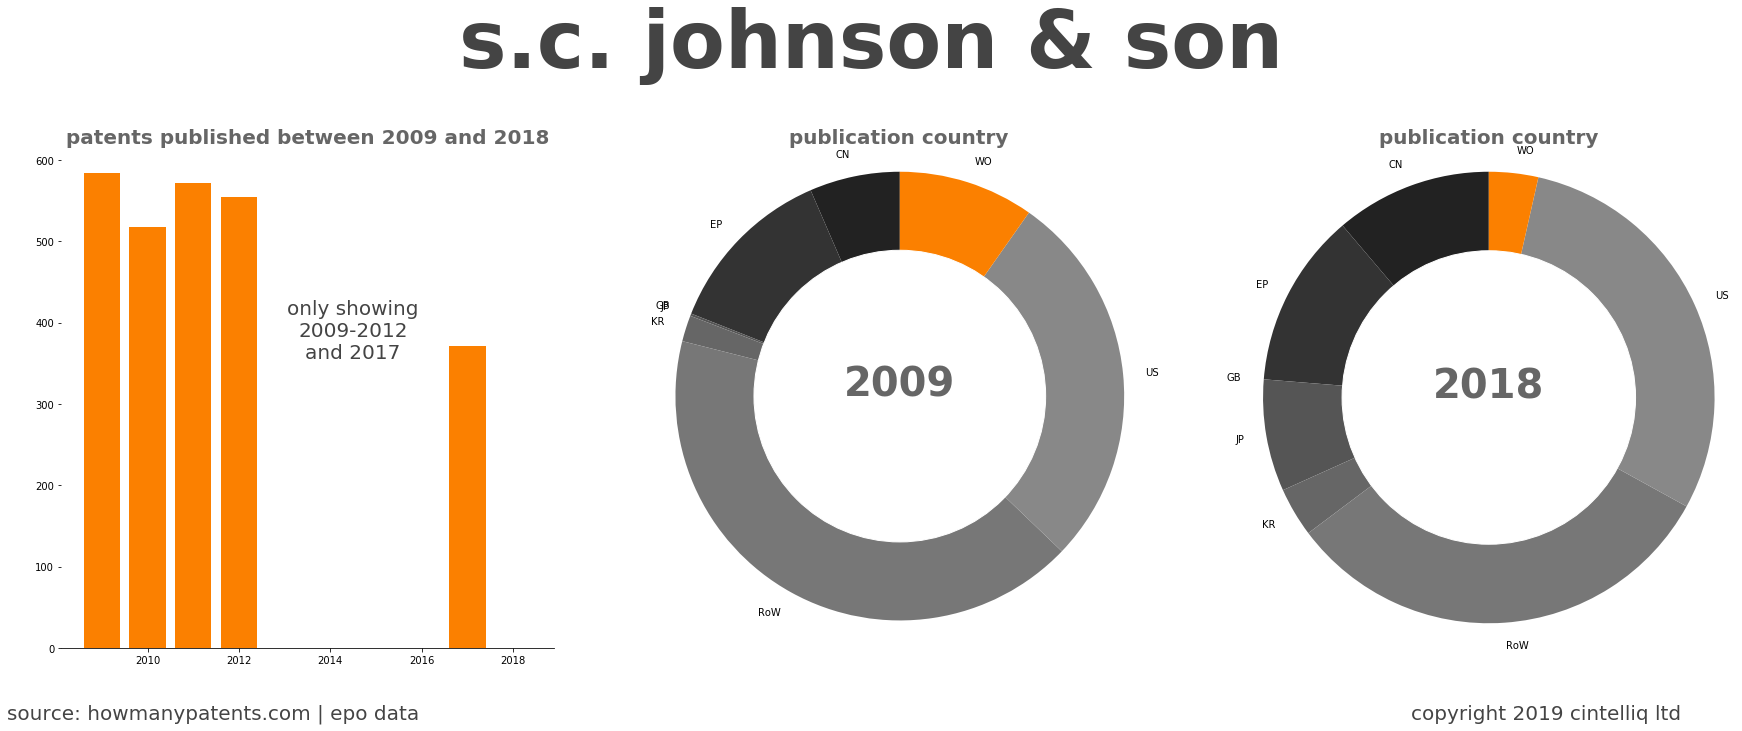 summary of patents for S.C. Johnson & Son